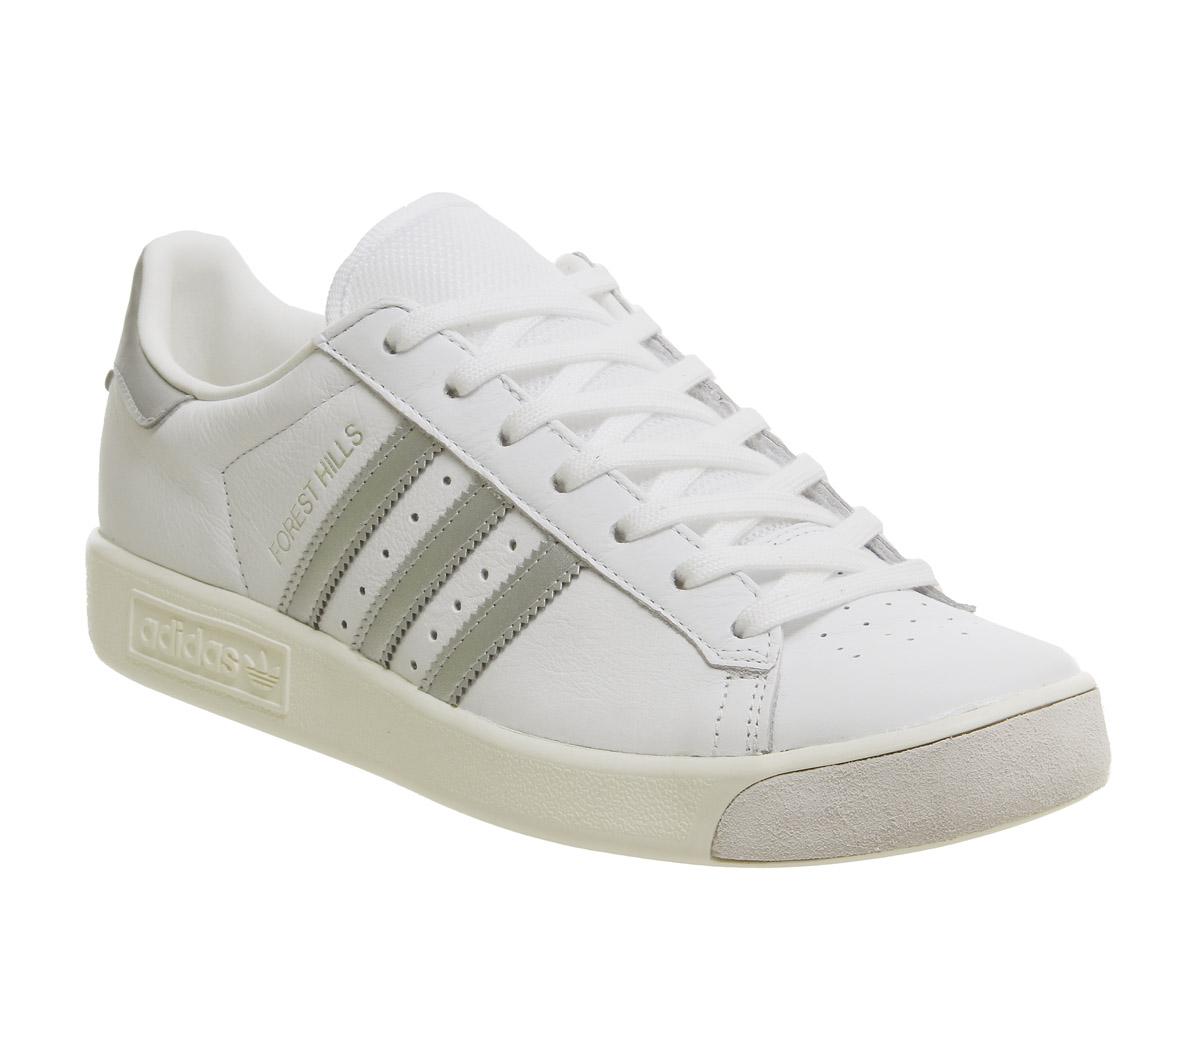 adidasForest Hills TrainersWhite Silver Metallic Off White Exclusive